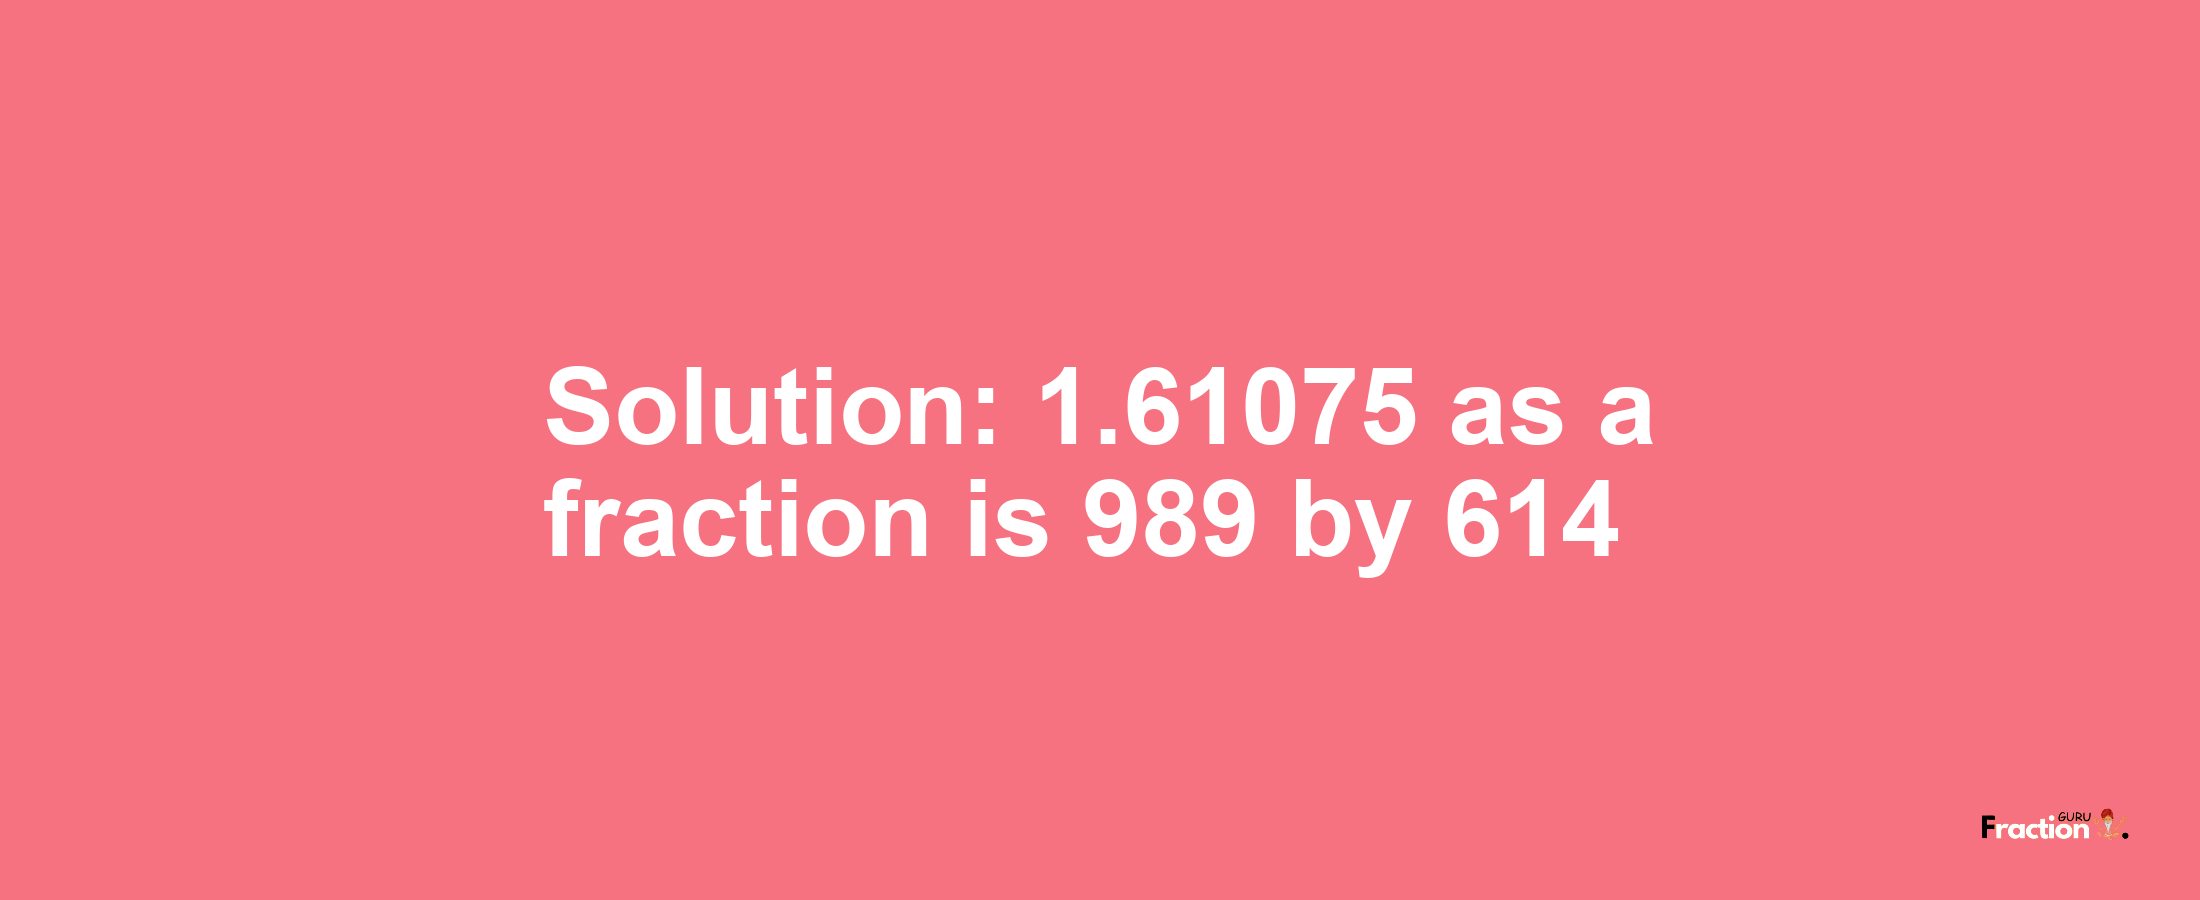 Solution:1.61075 as a fraction is 989/614